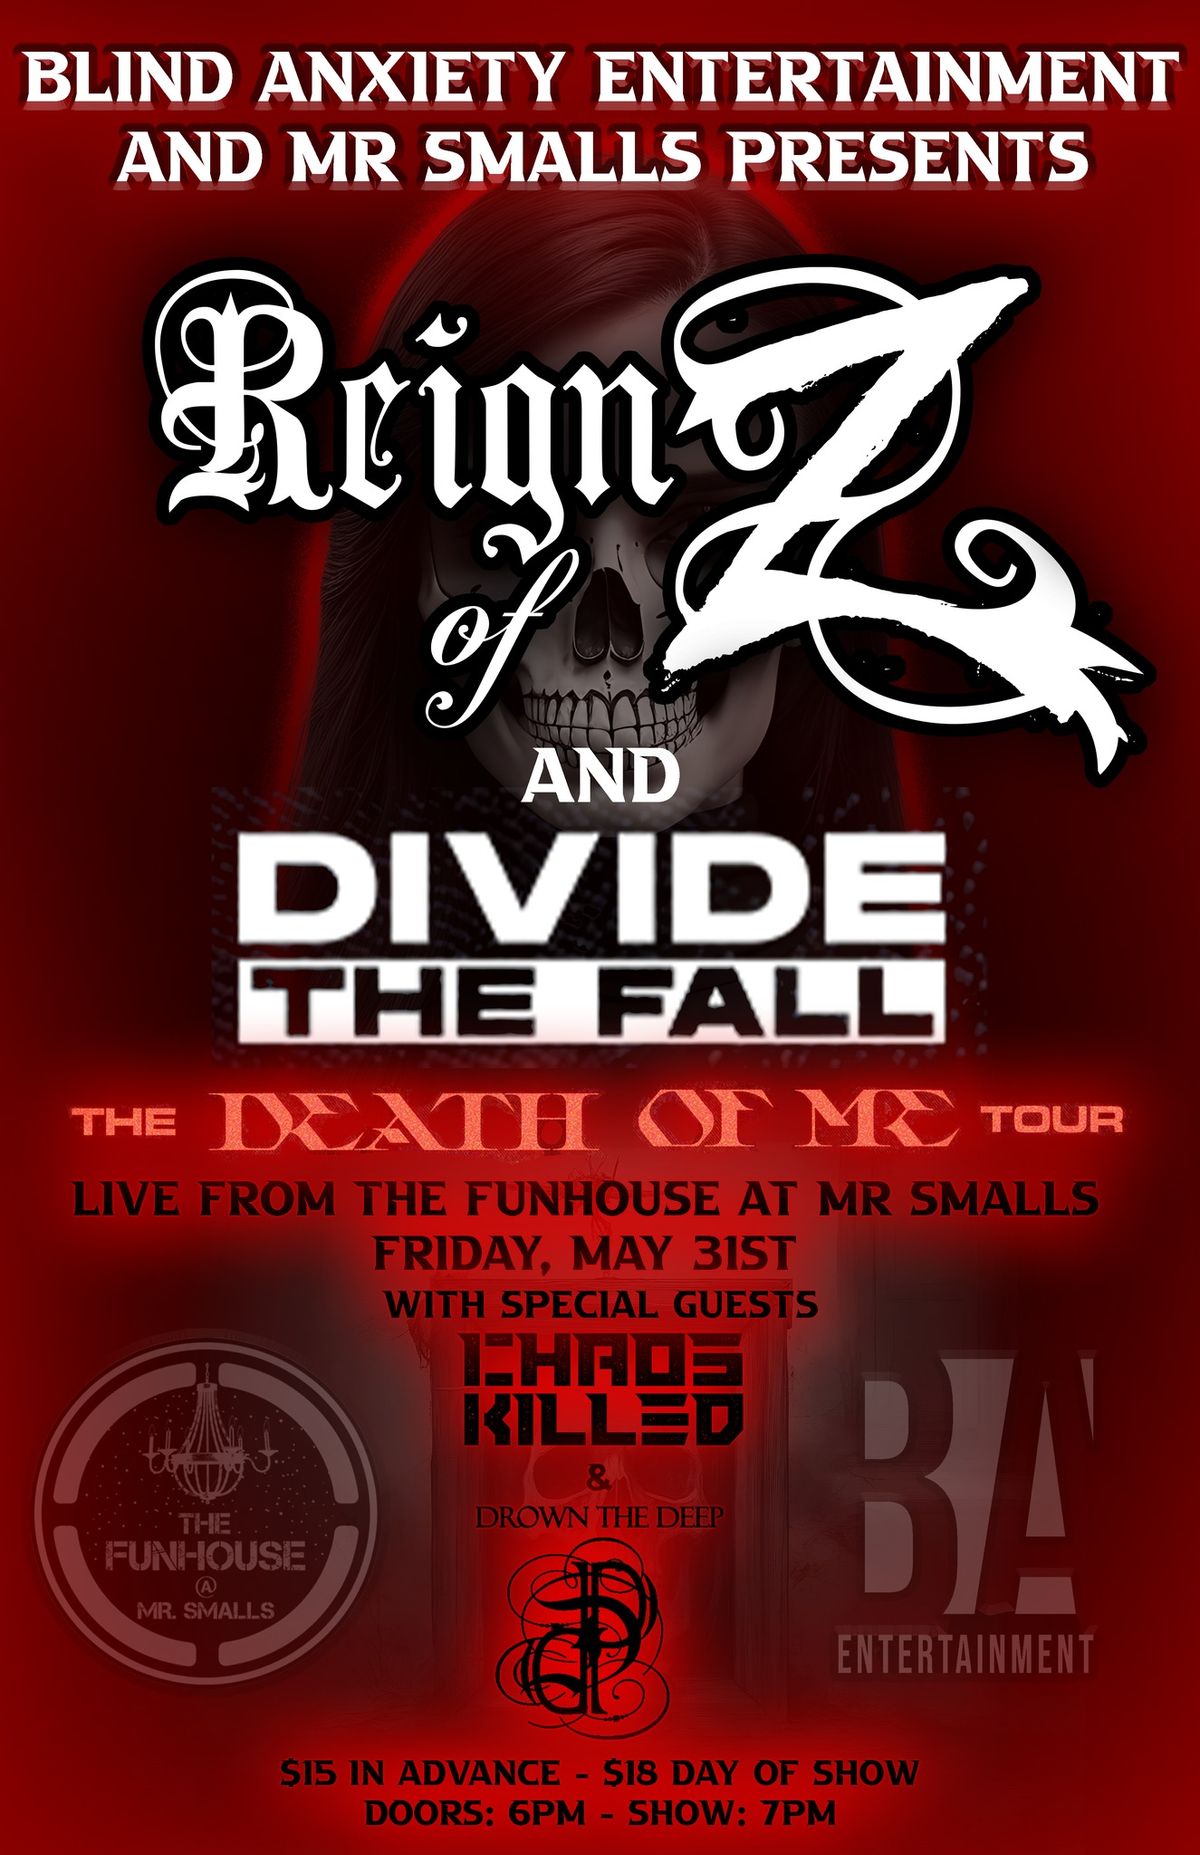 Mr. Smalls Presents: Reign of Z & Divide the Fall wsg Chaos Killed, Drown the Deep